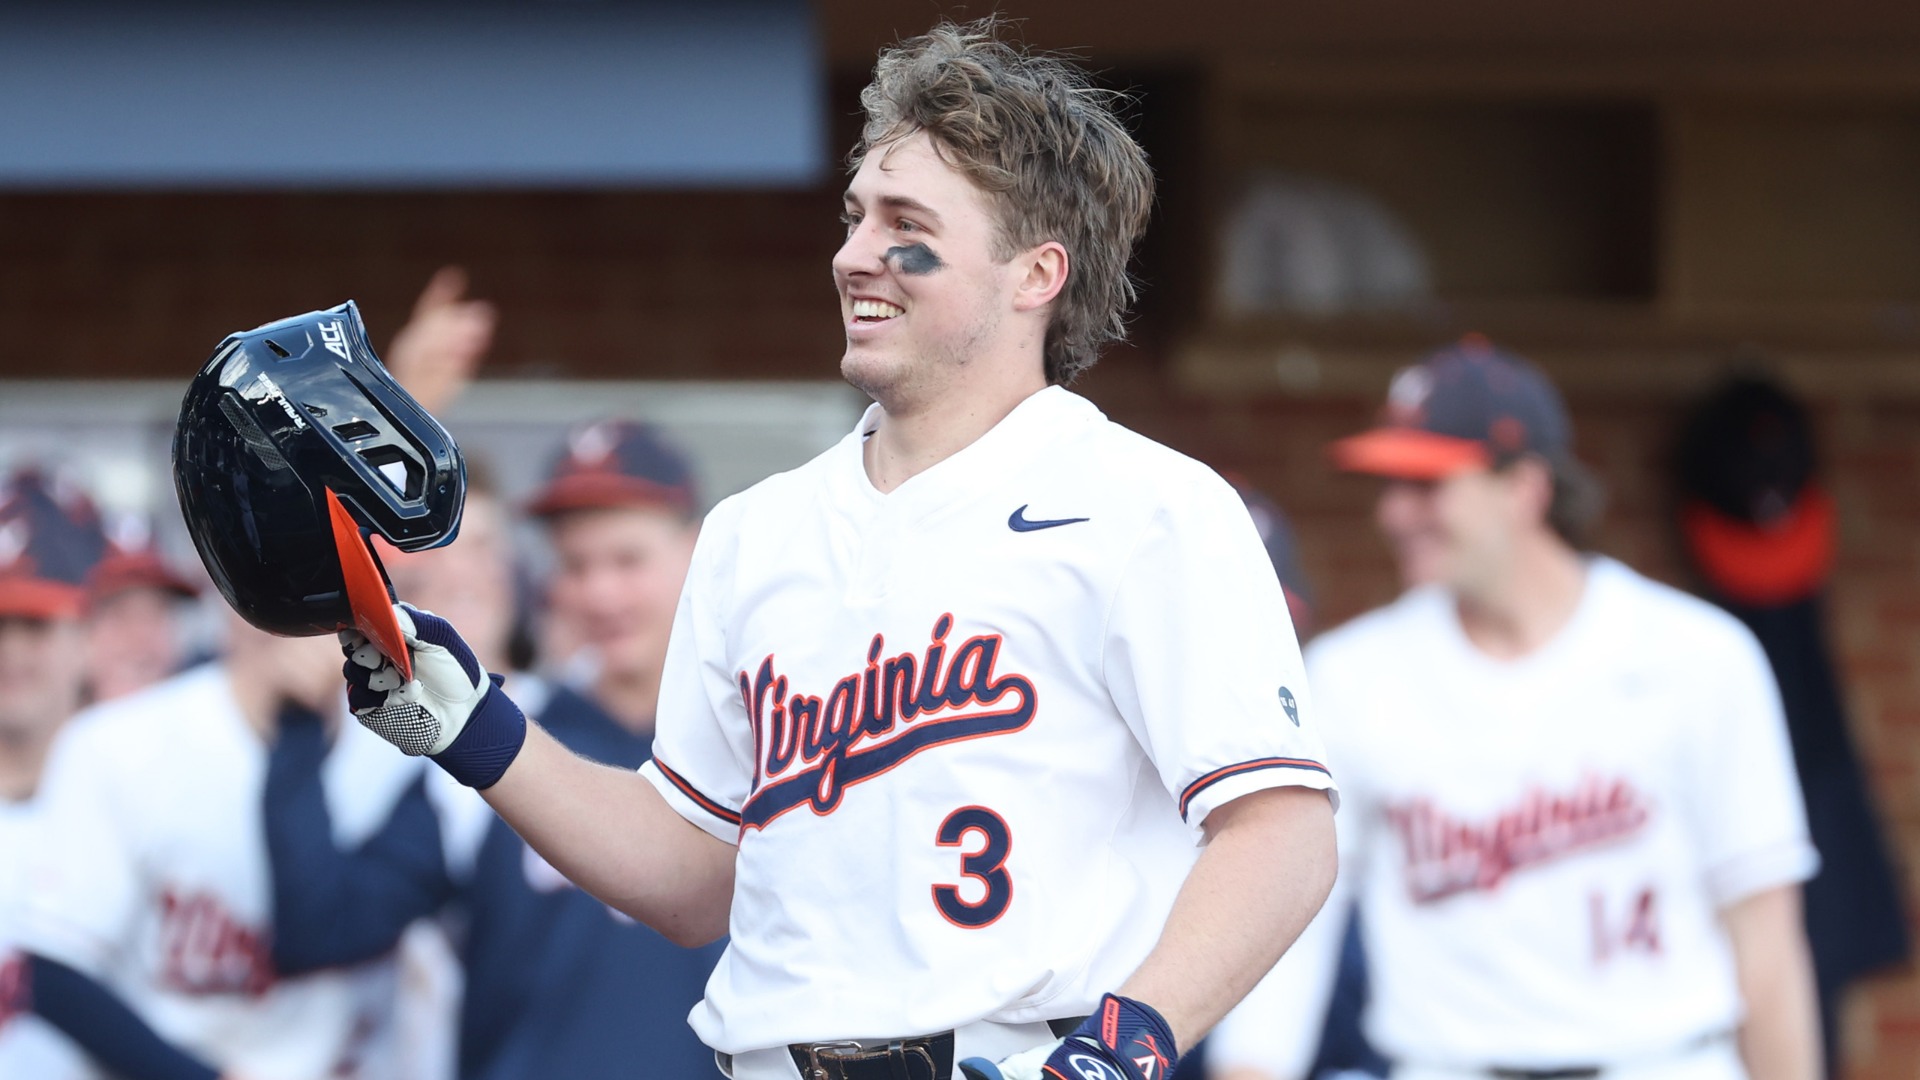 Red Sox draft Kyle Teel, Virginia catcher, with No. 14 overall